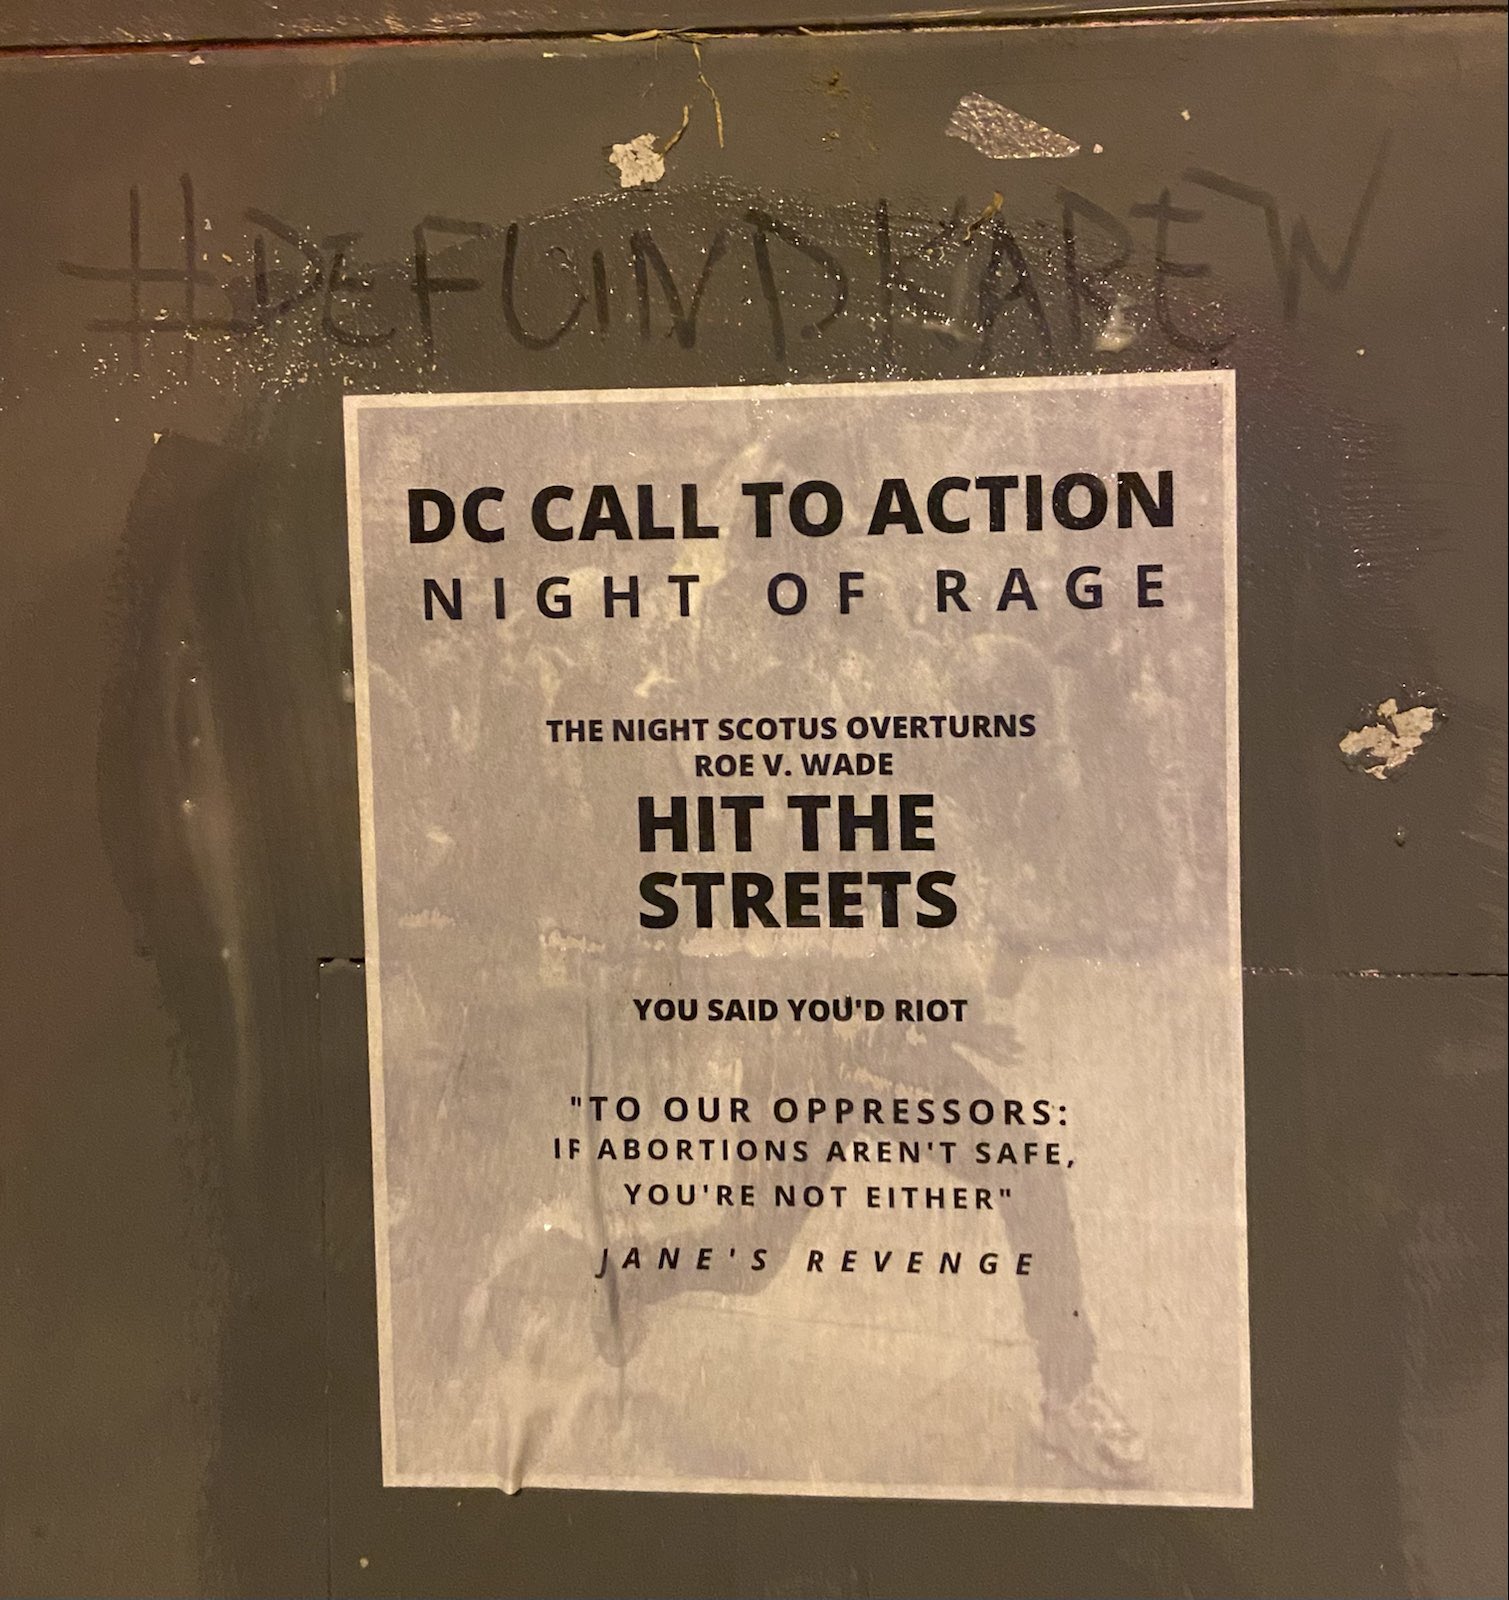 Janes Revenge Night of Rage Posters in DC